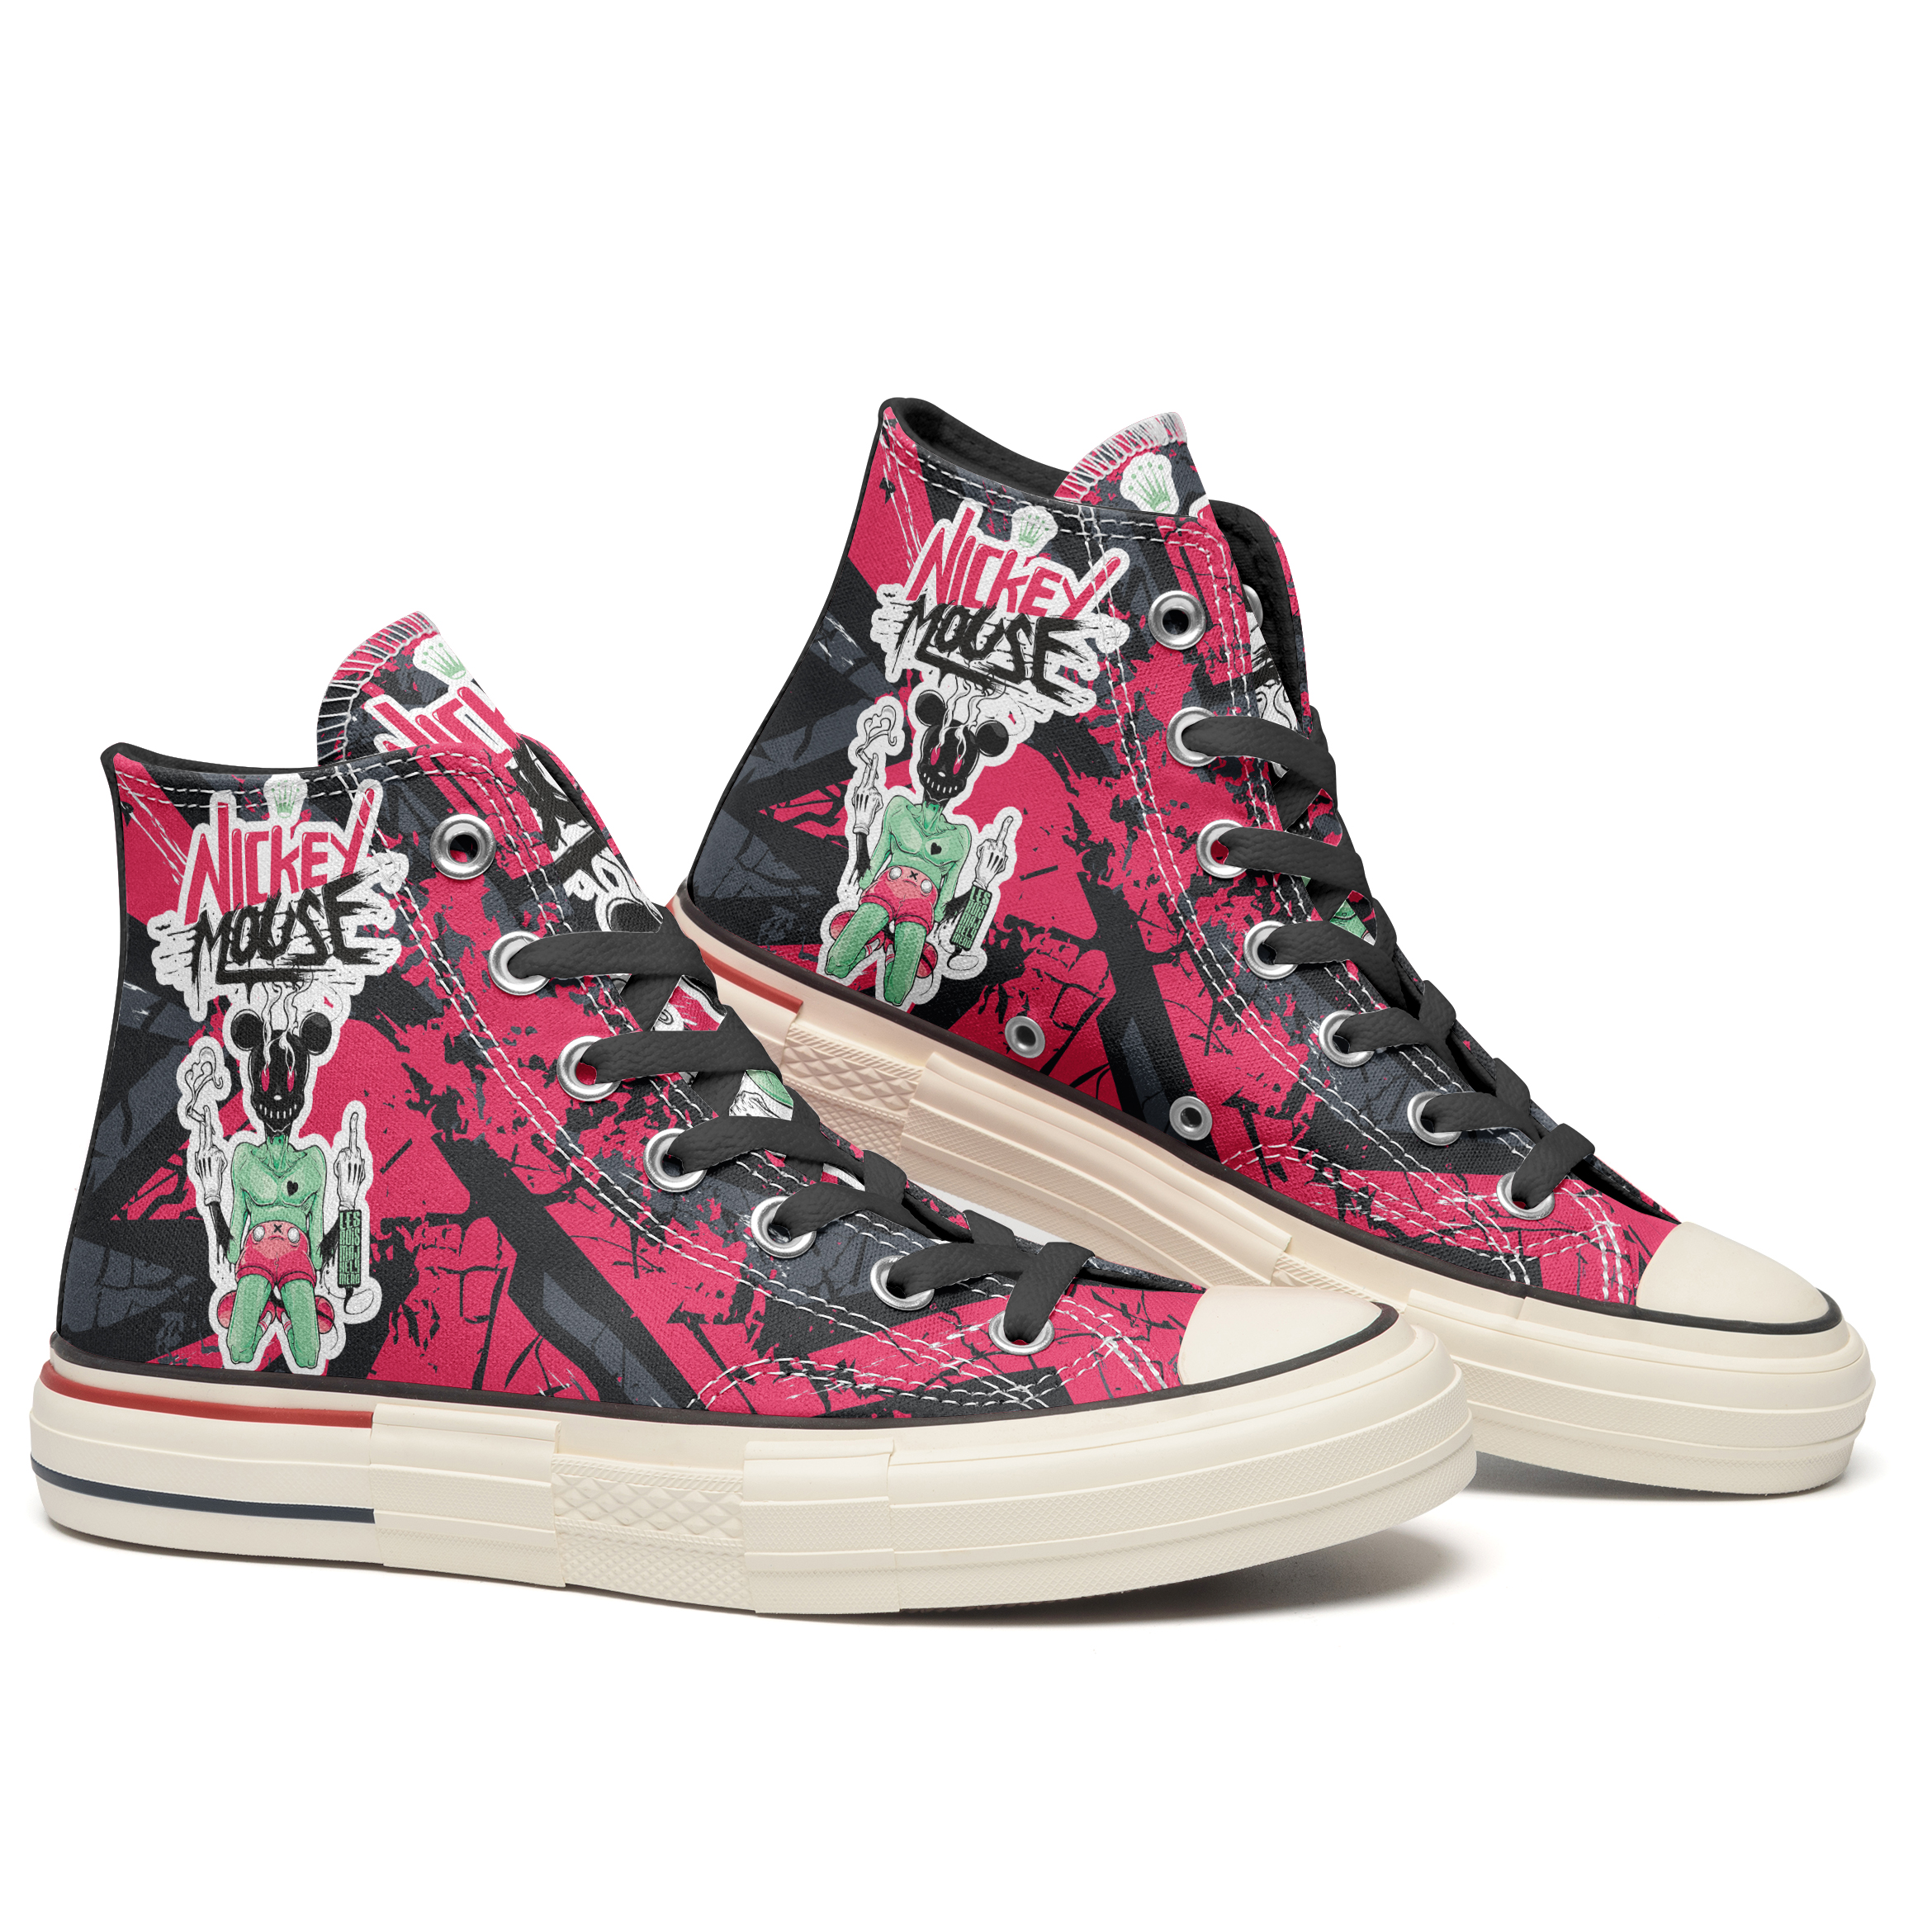 Nickey Mouse High Top Canvas Shoes Special Edition